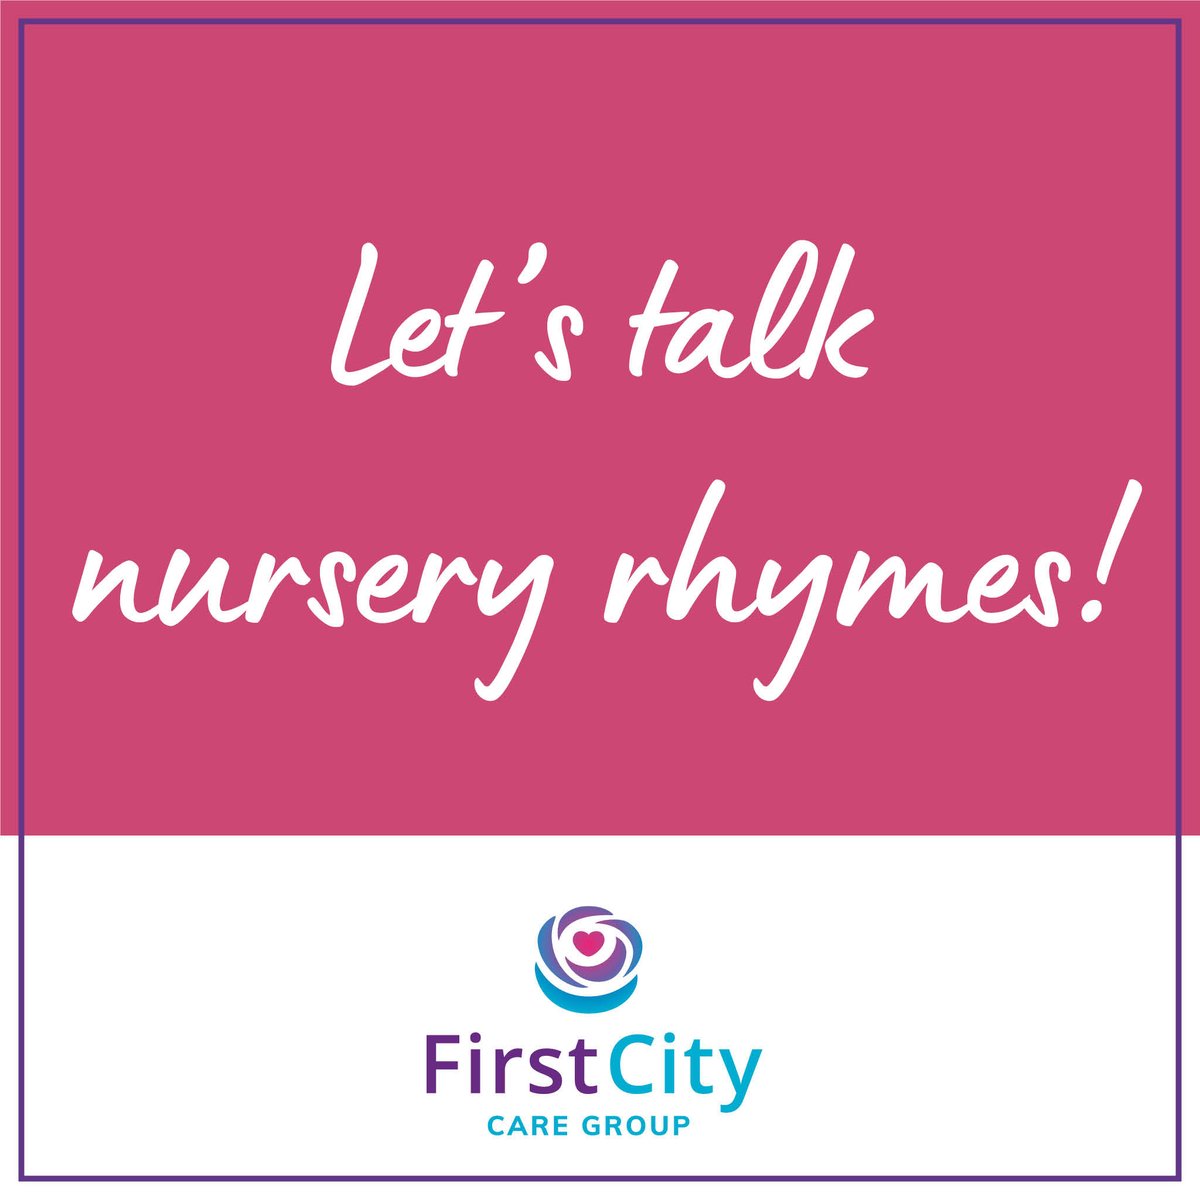 Let's talk Nursery Rhymes … do you have a favourite? It could be from your own childhood that you shared with someone special, or in your adult life now passing it on to someone else...

#TuesdayThoughts #TuesdayTopic #Gettoknowyourcolleagues #gettoknowme #Shareyourthoughts